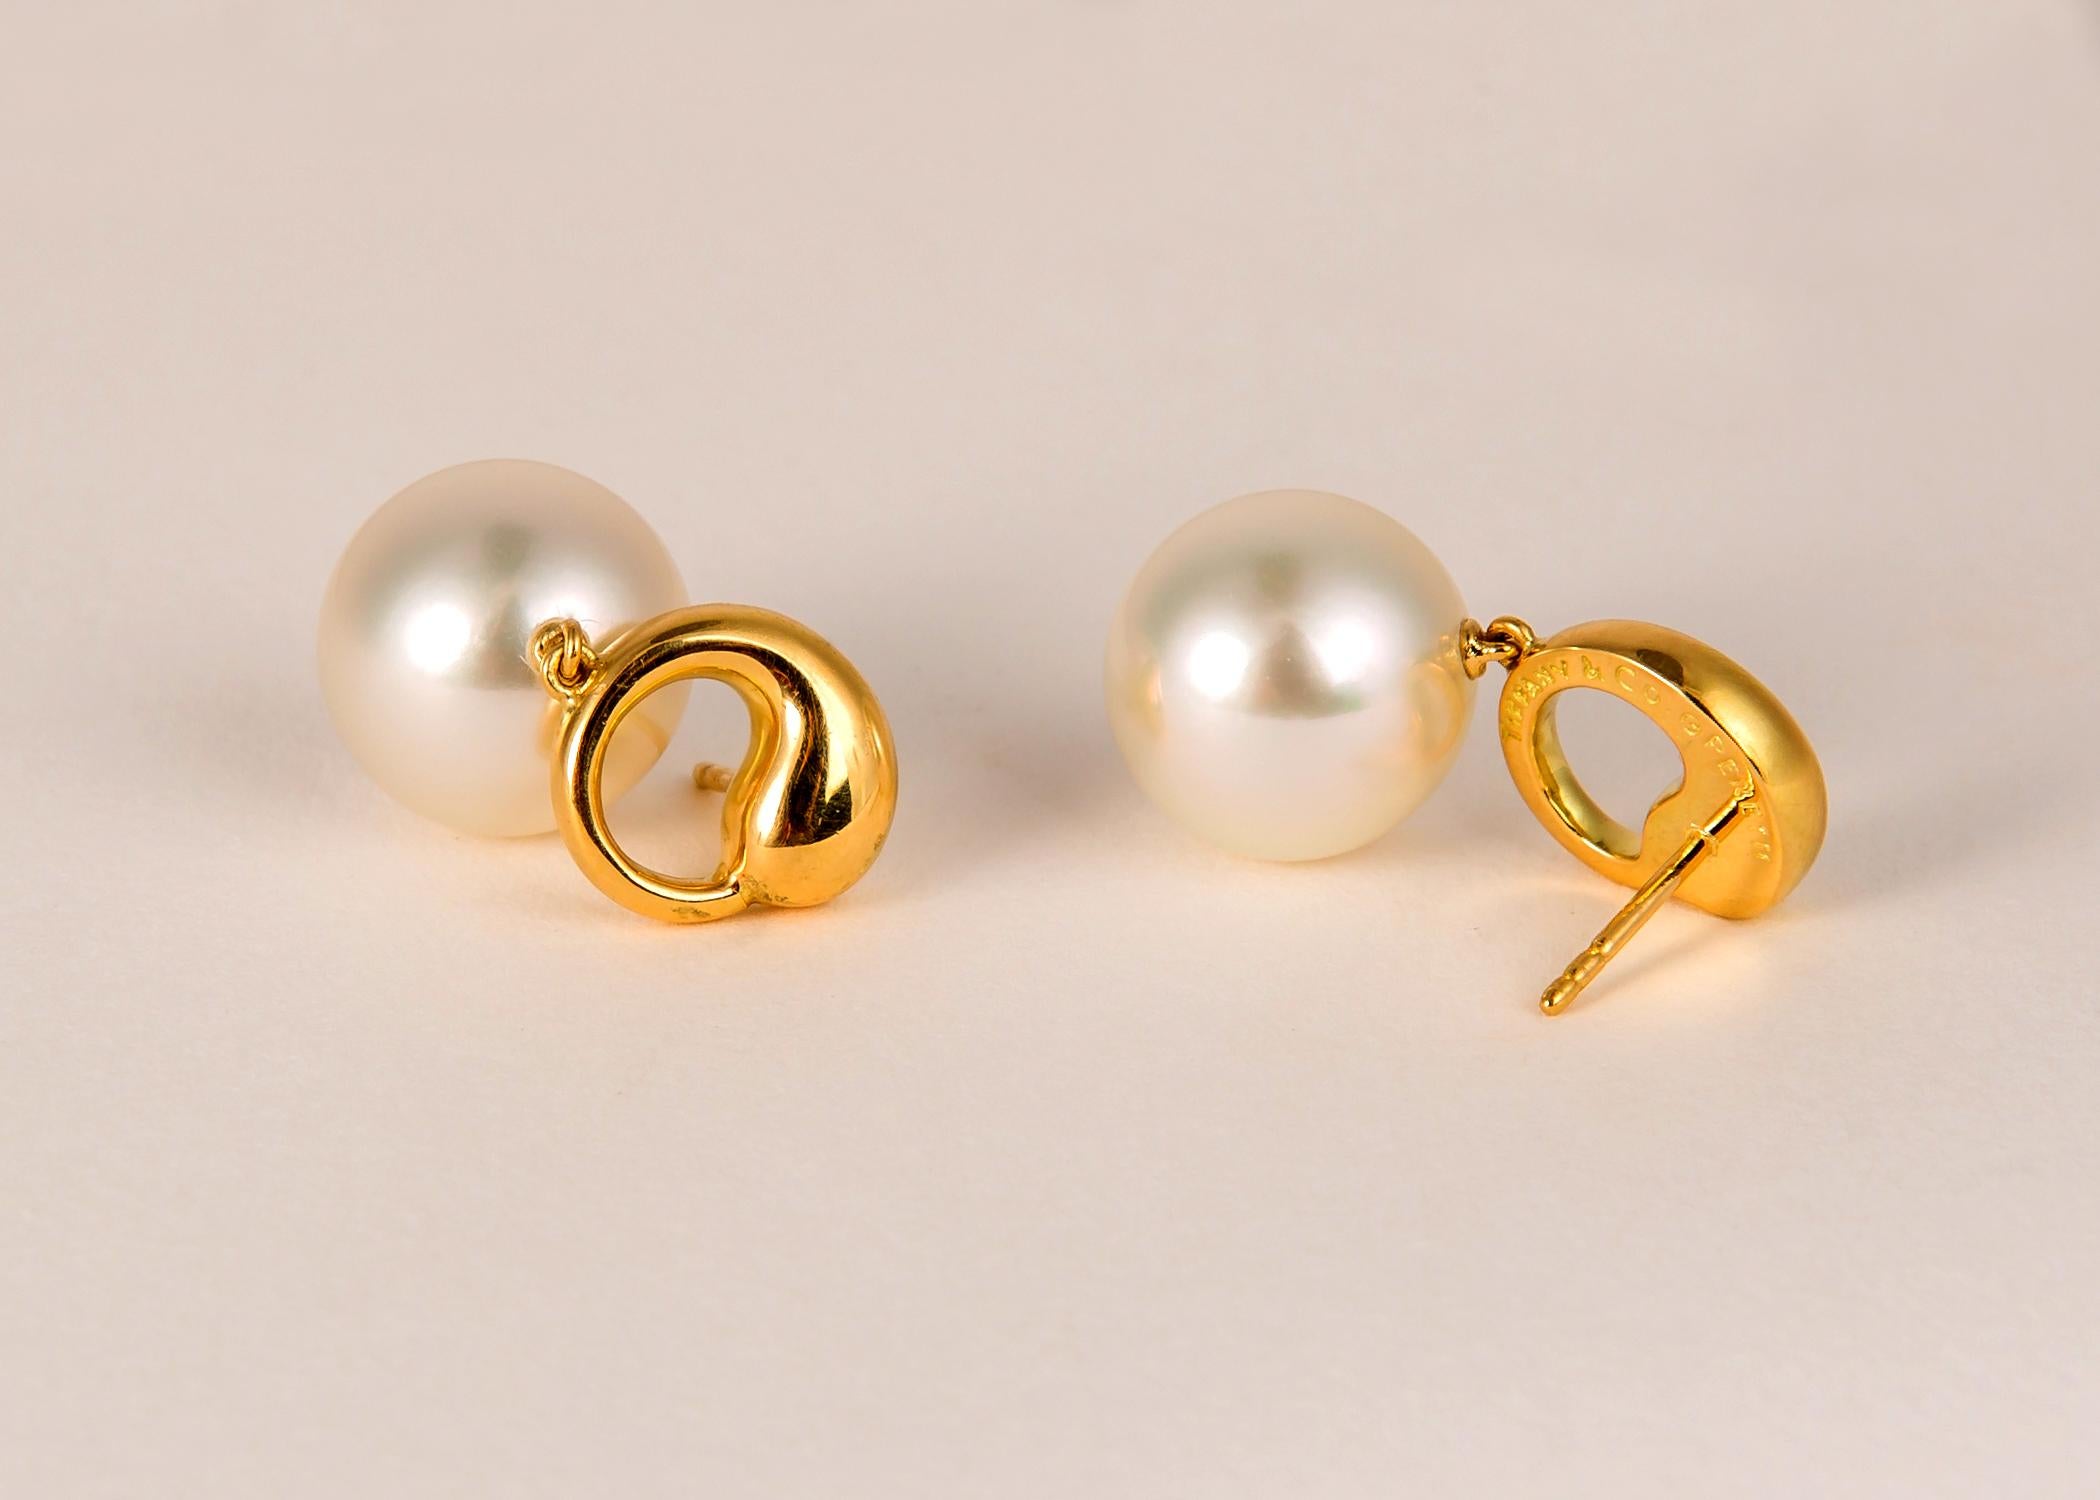 Elsa Peretti began her career with Tiffany & Co. in 1974. Her soft organic designs are like no other and have become classic. Her eternity circle and South Sea pearls is rarely available. The 12.9 mm pearls are perfectly matched gem quality.  1 inch